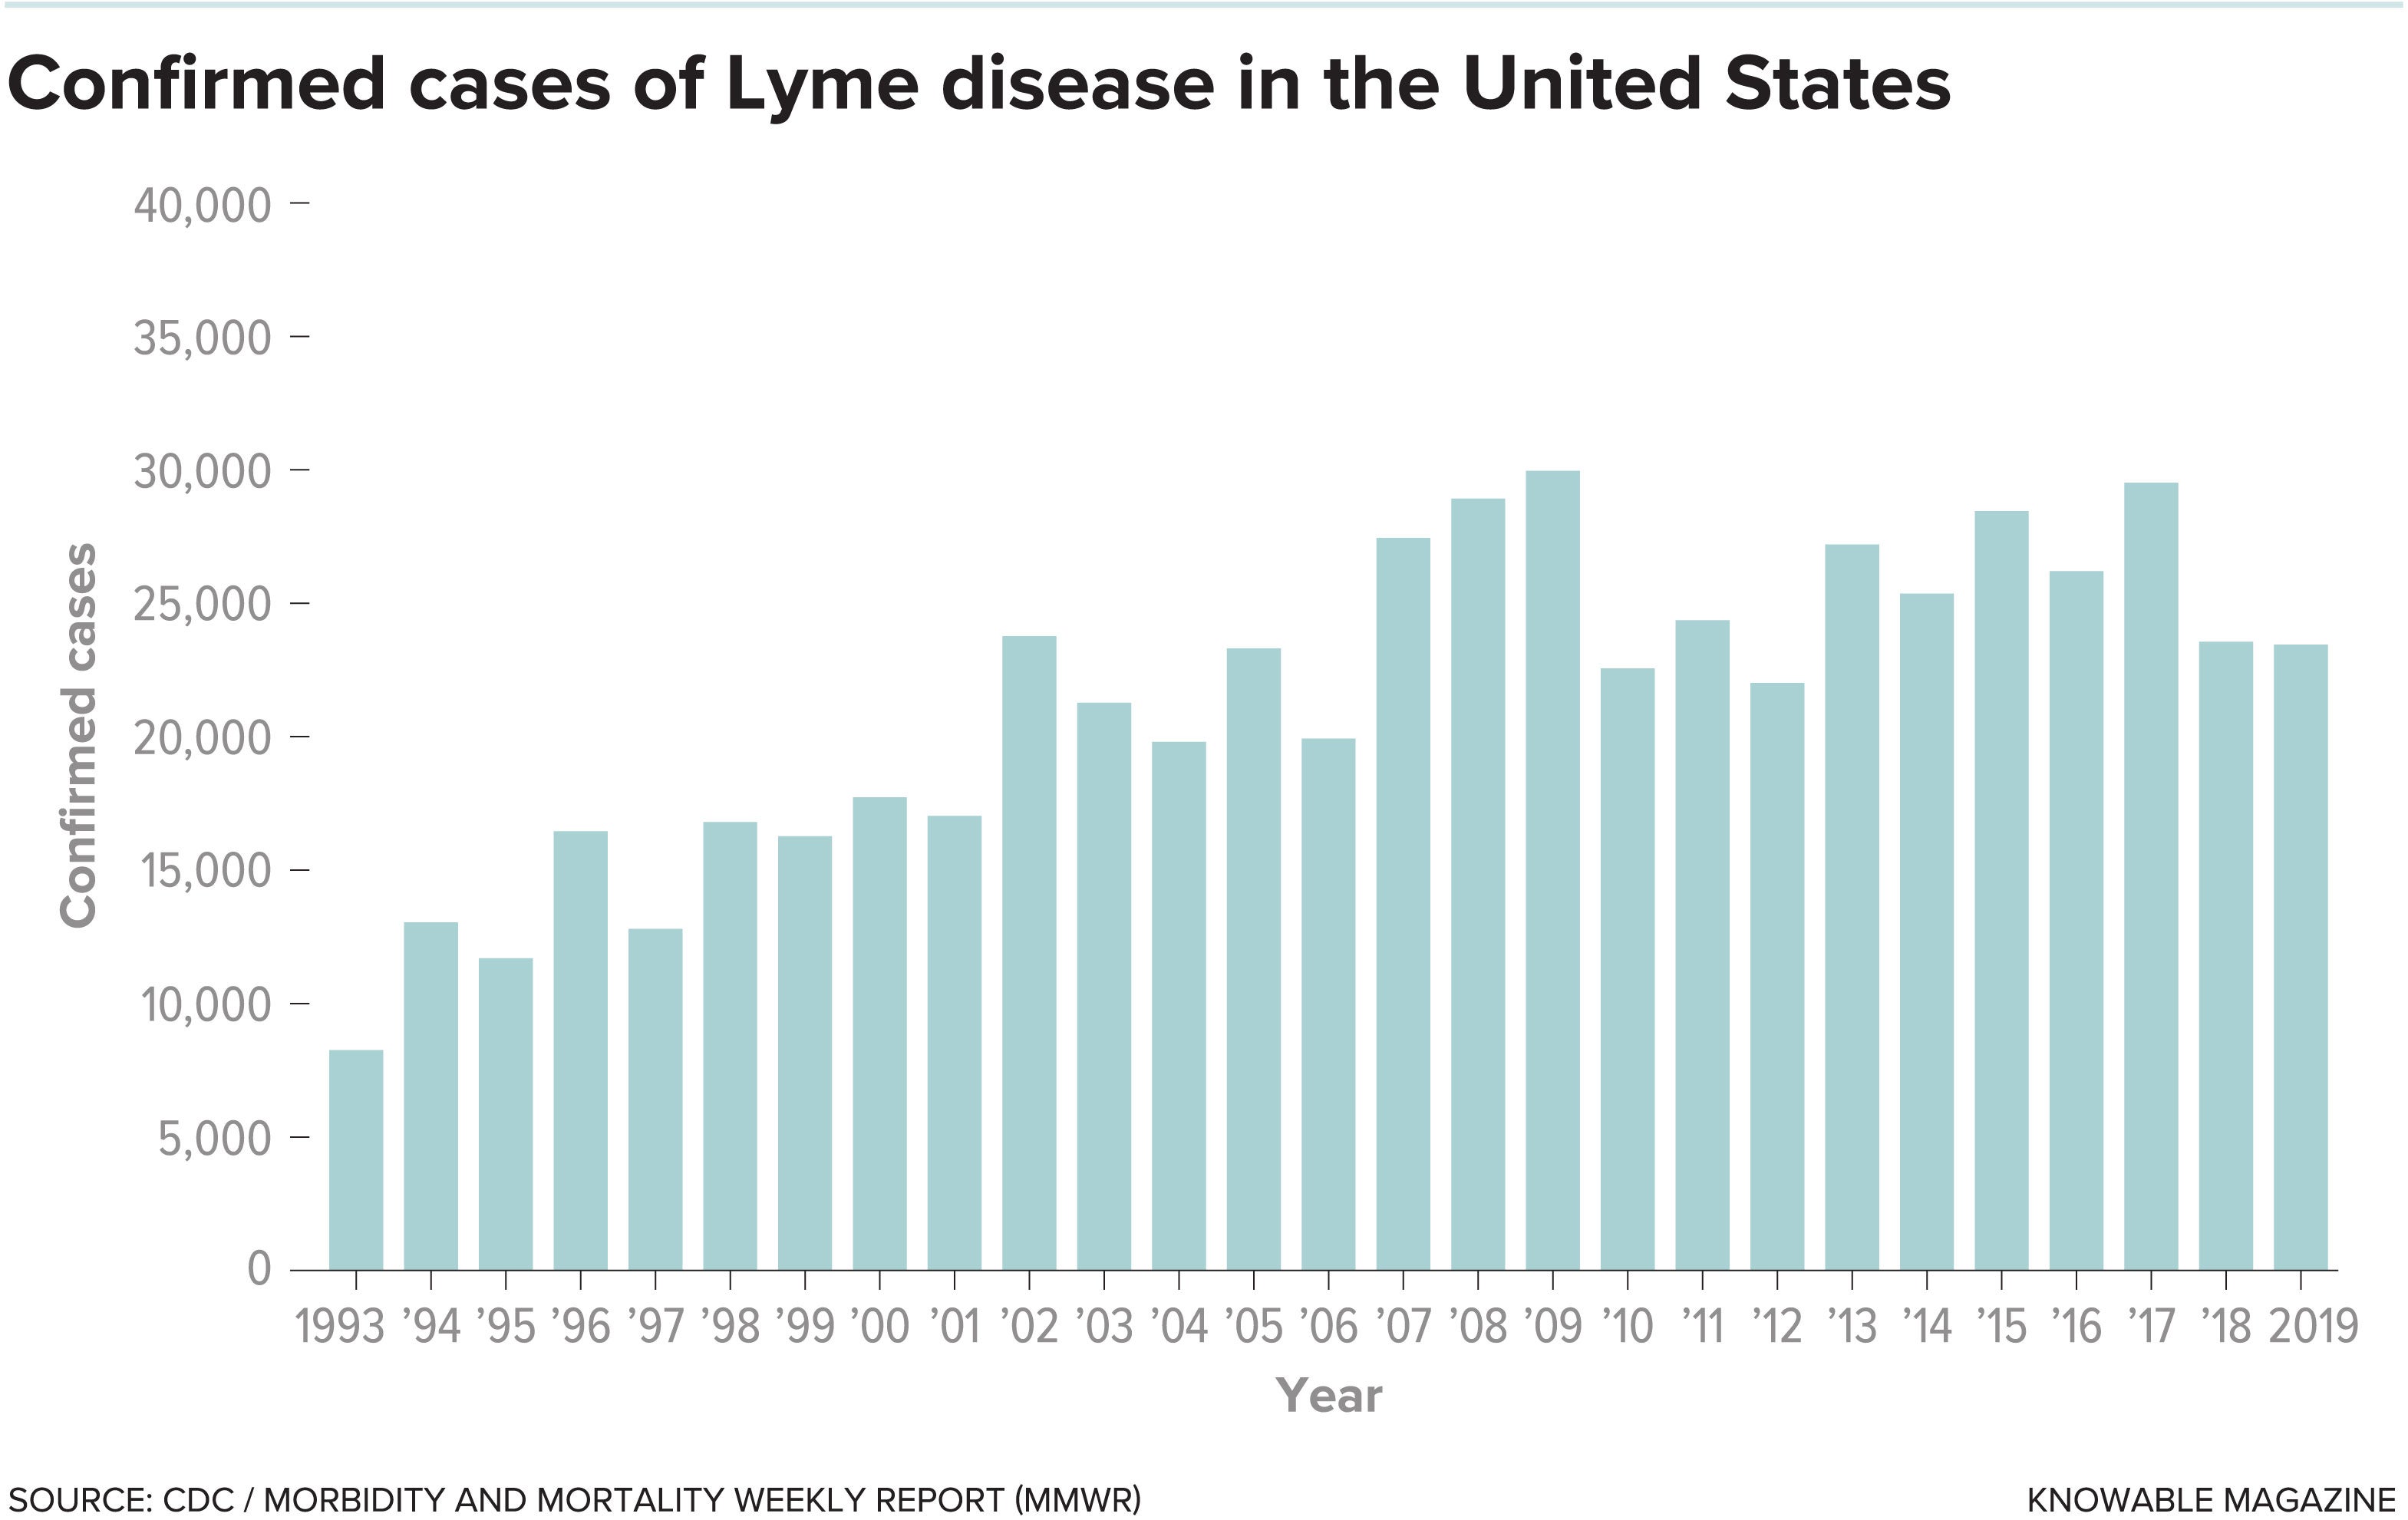 Confirmed cases of Lyme disease in the United States.